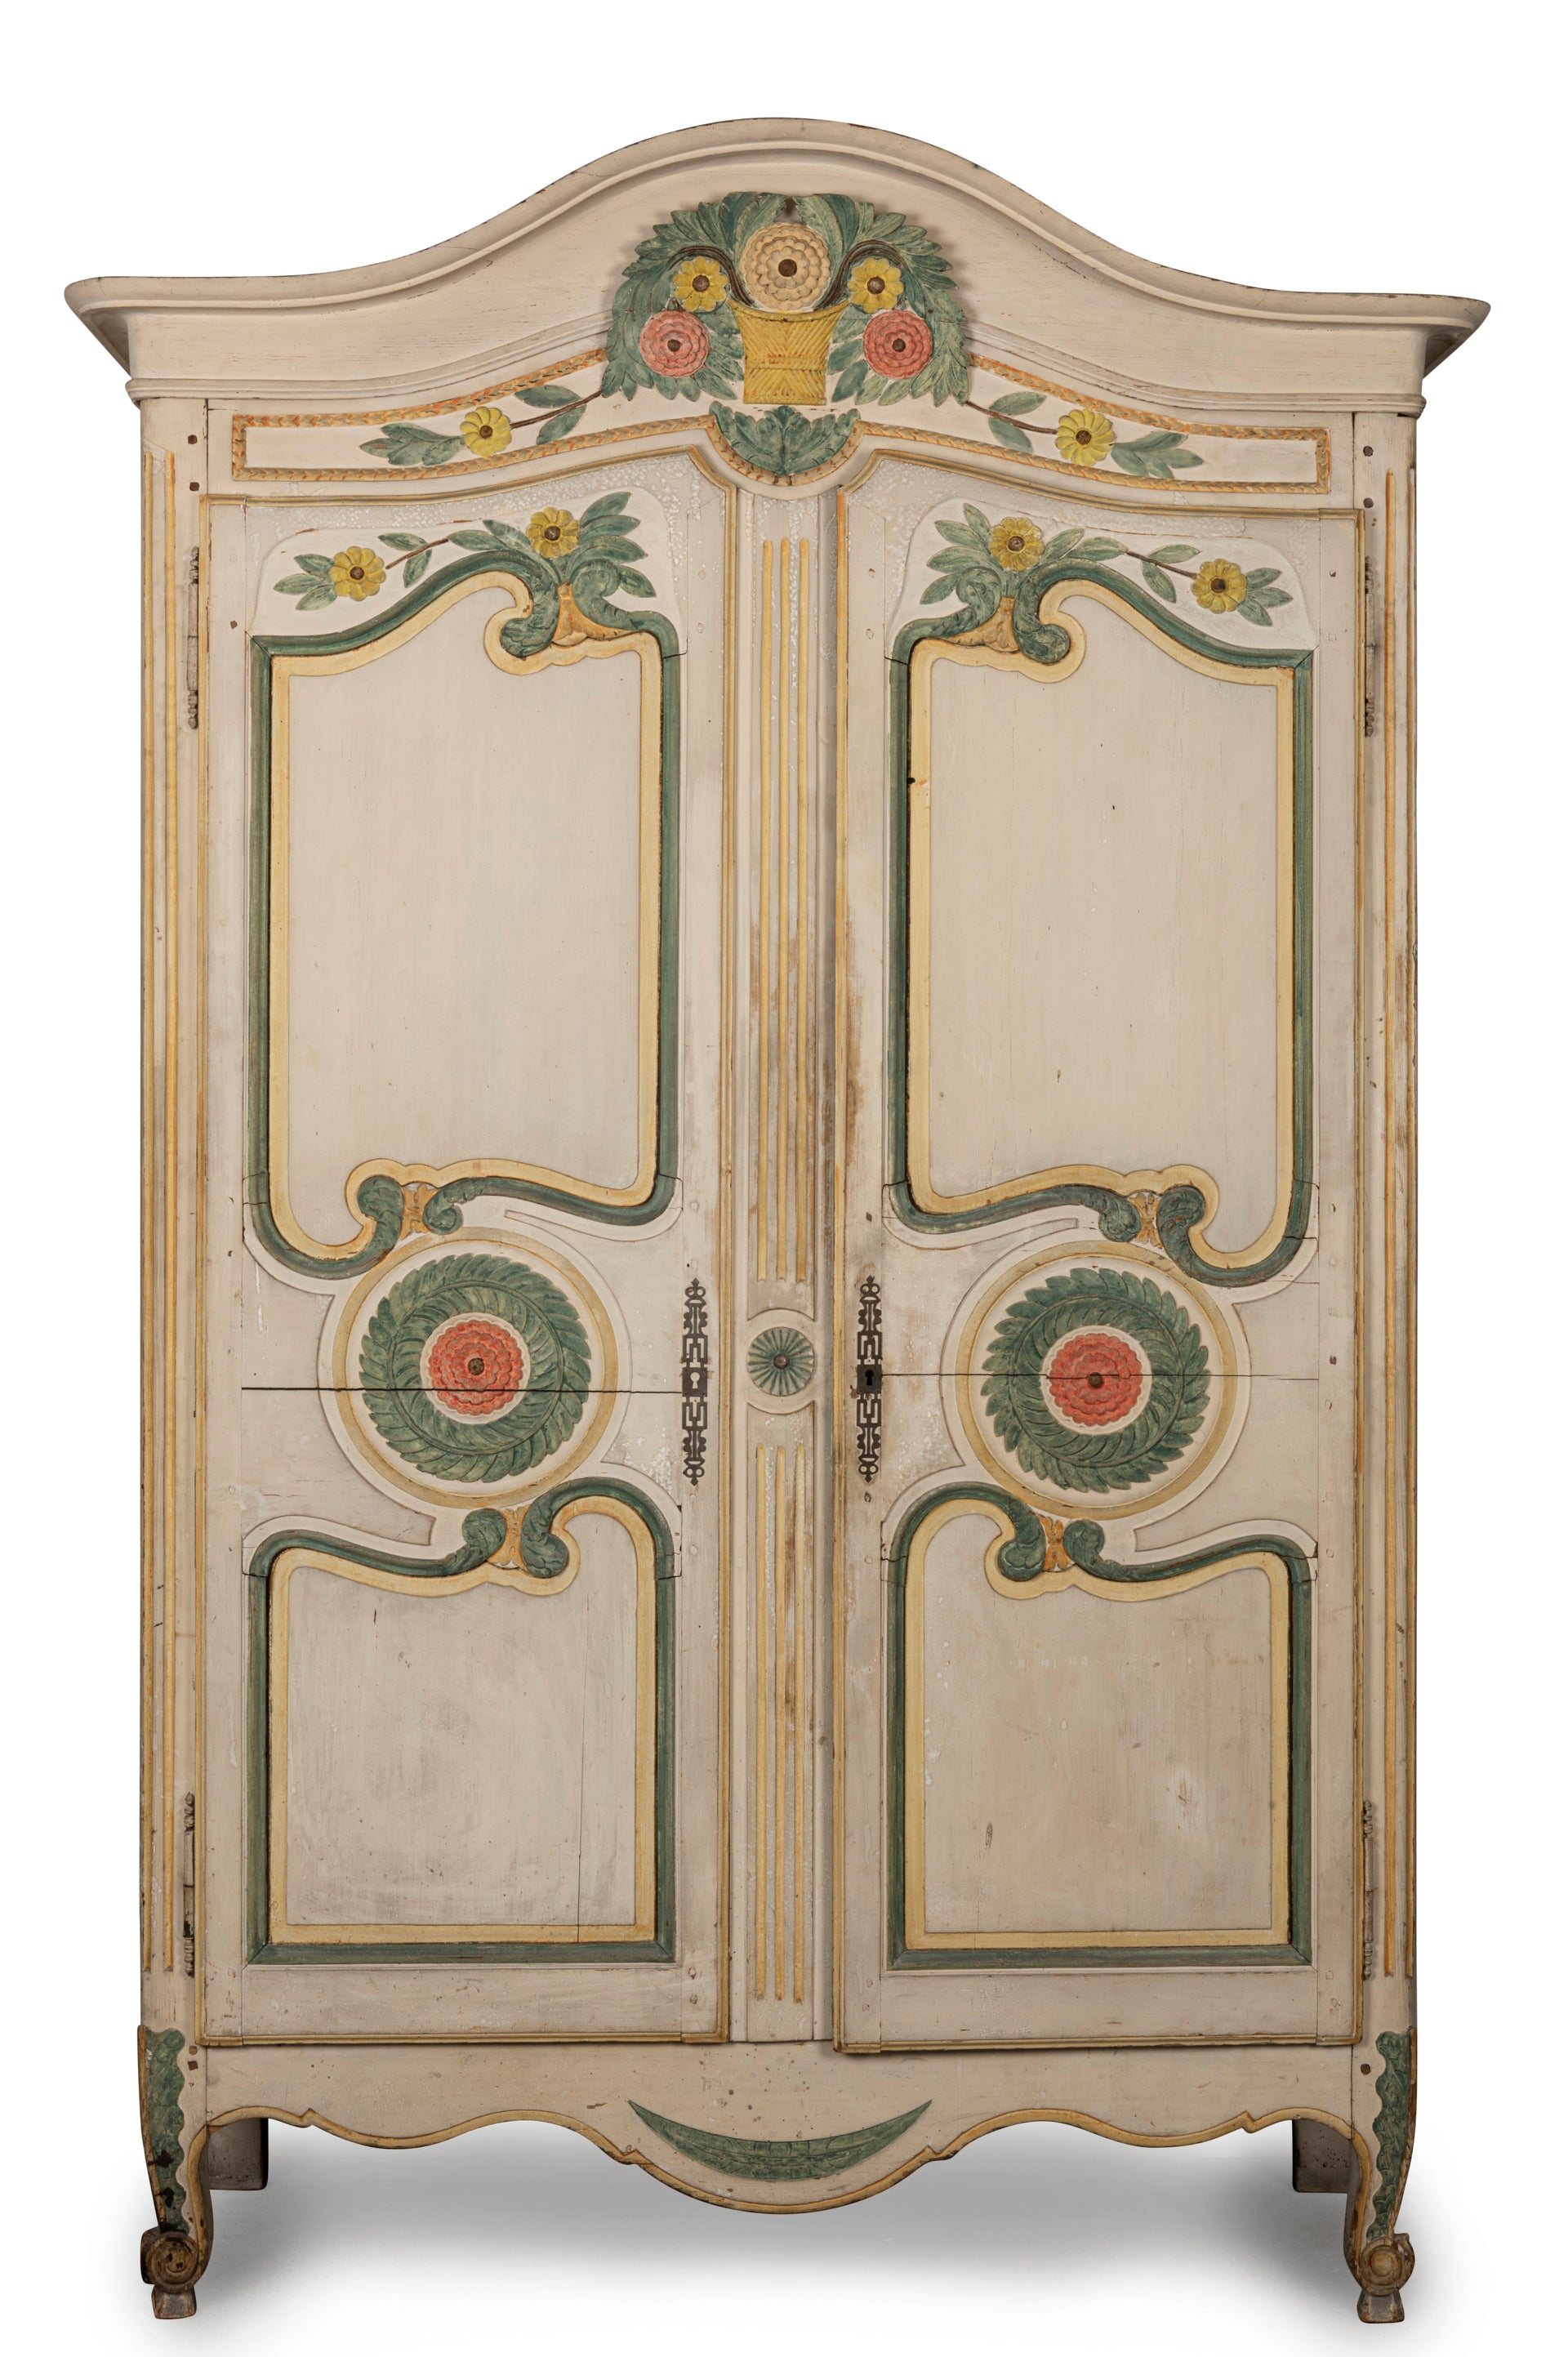 SOLD A very pretty carved and polychrome painted two door Armoire, French 19th Century